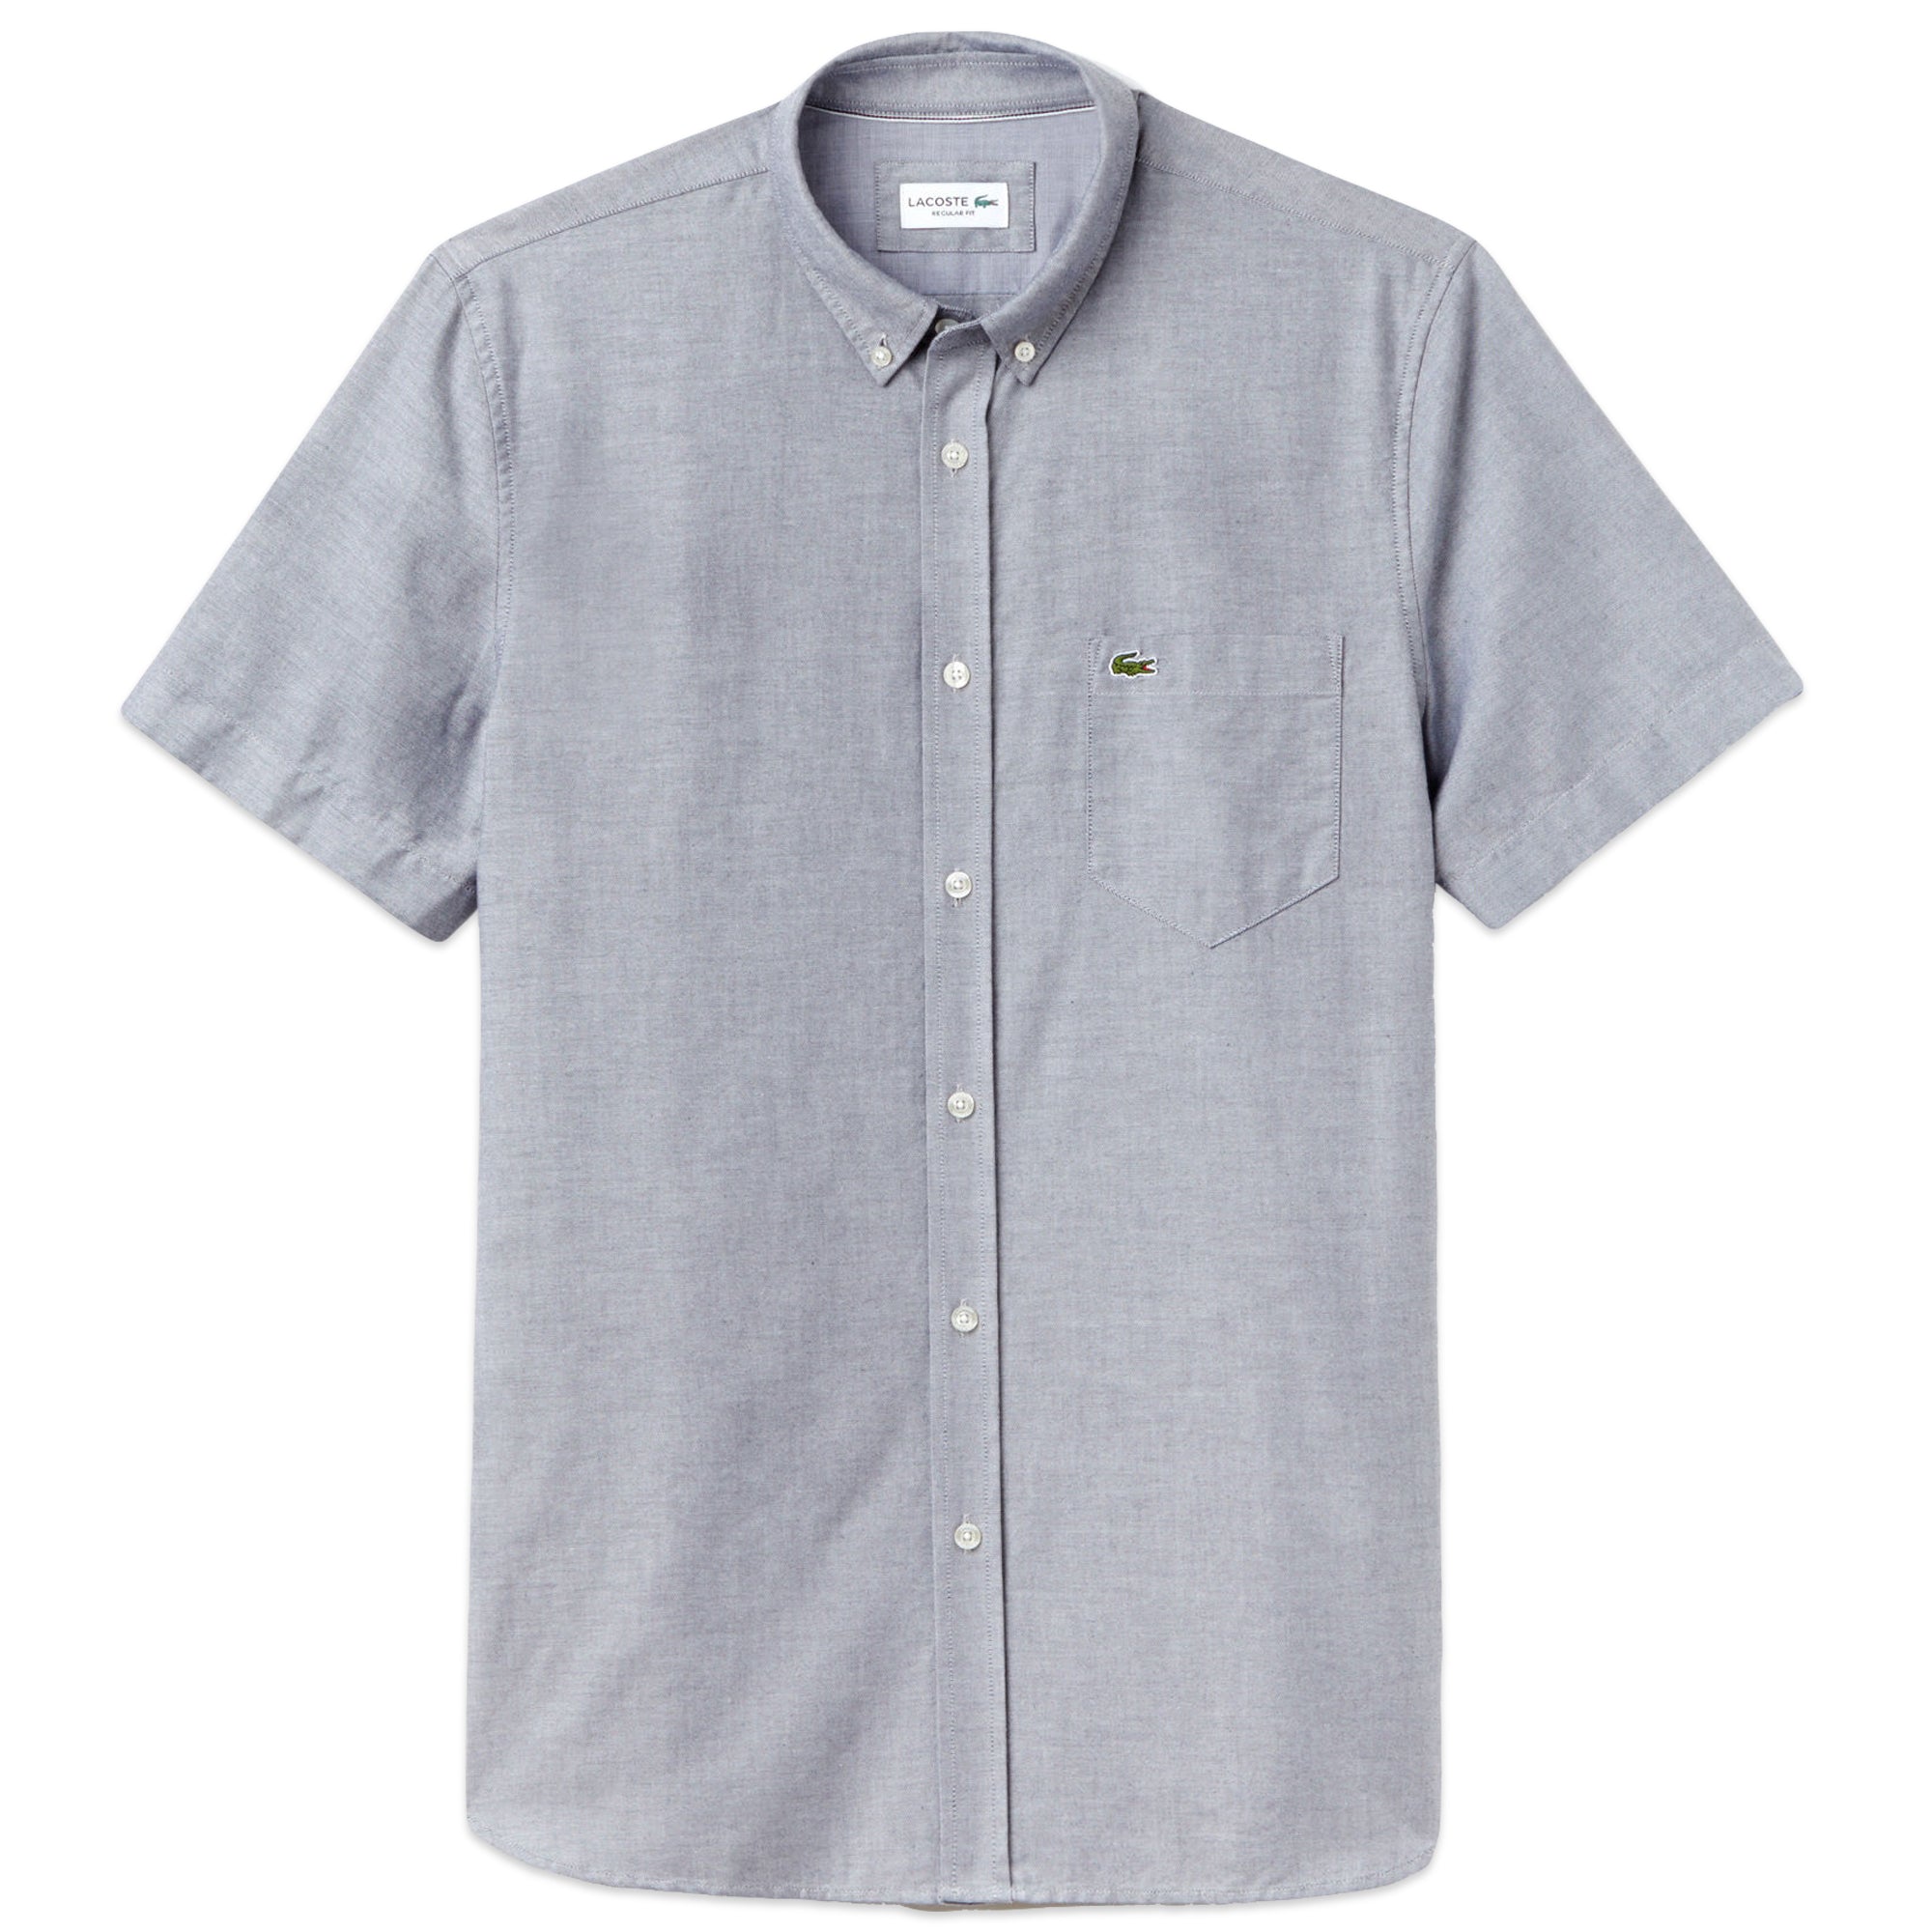 Lacoste Oxford Short Sleeve Shirt CH4975 - Navy